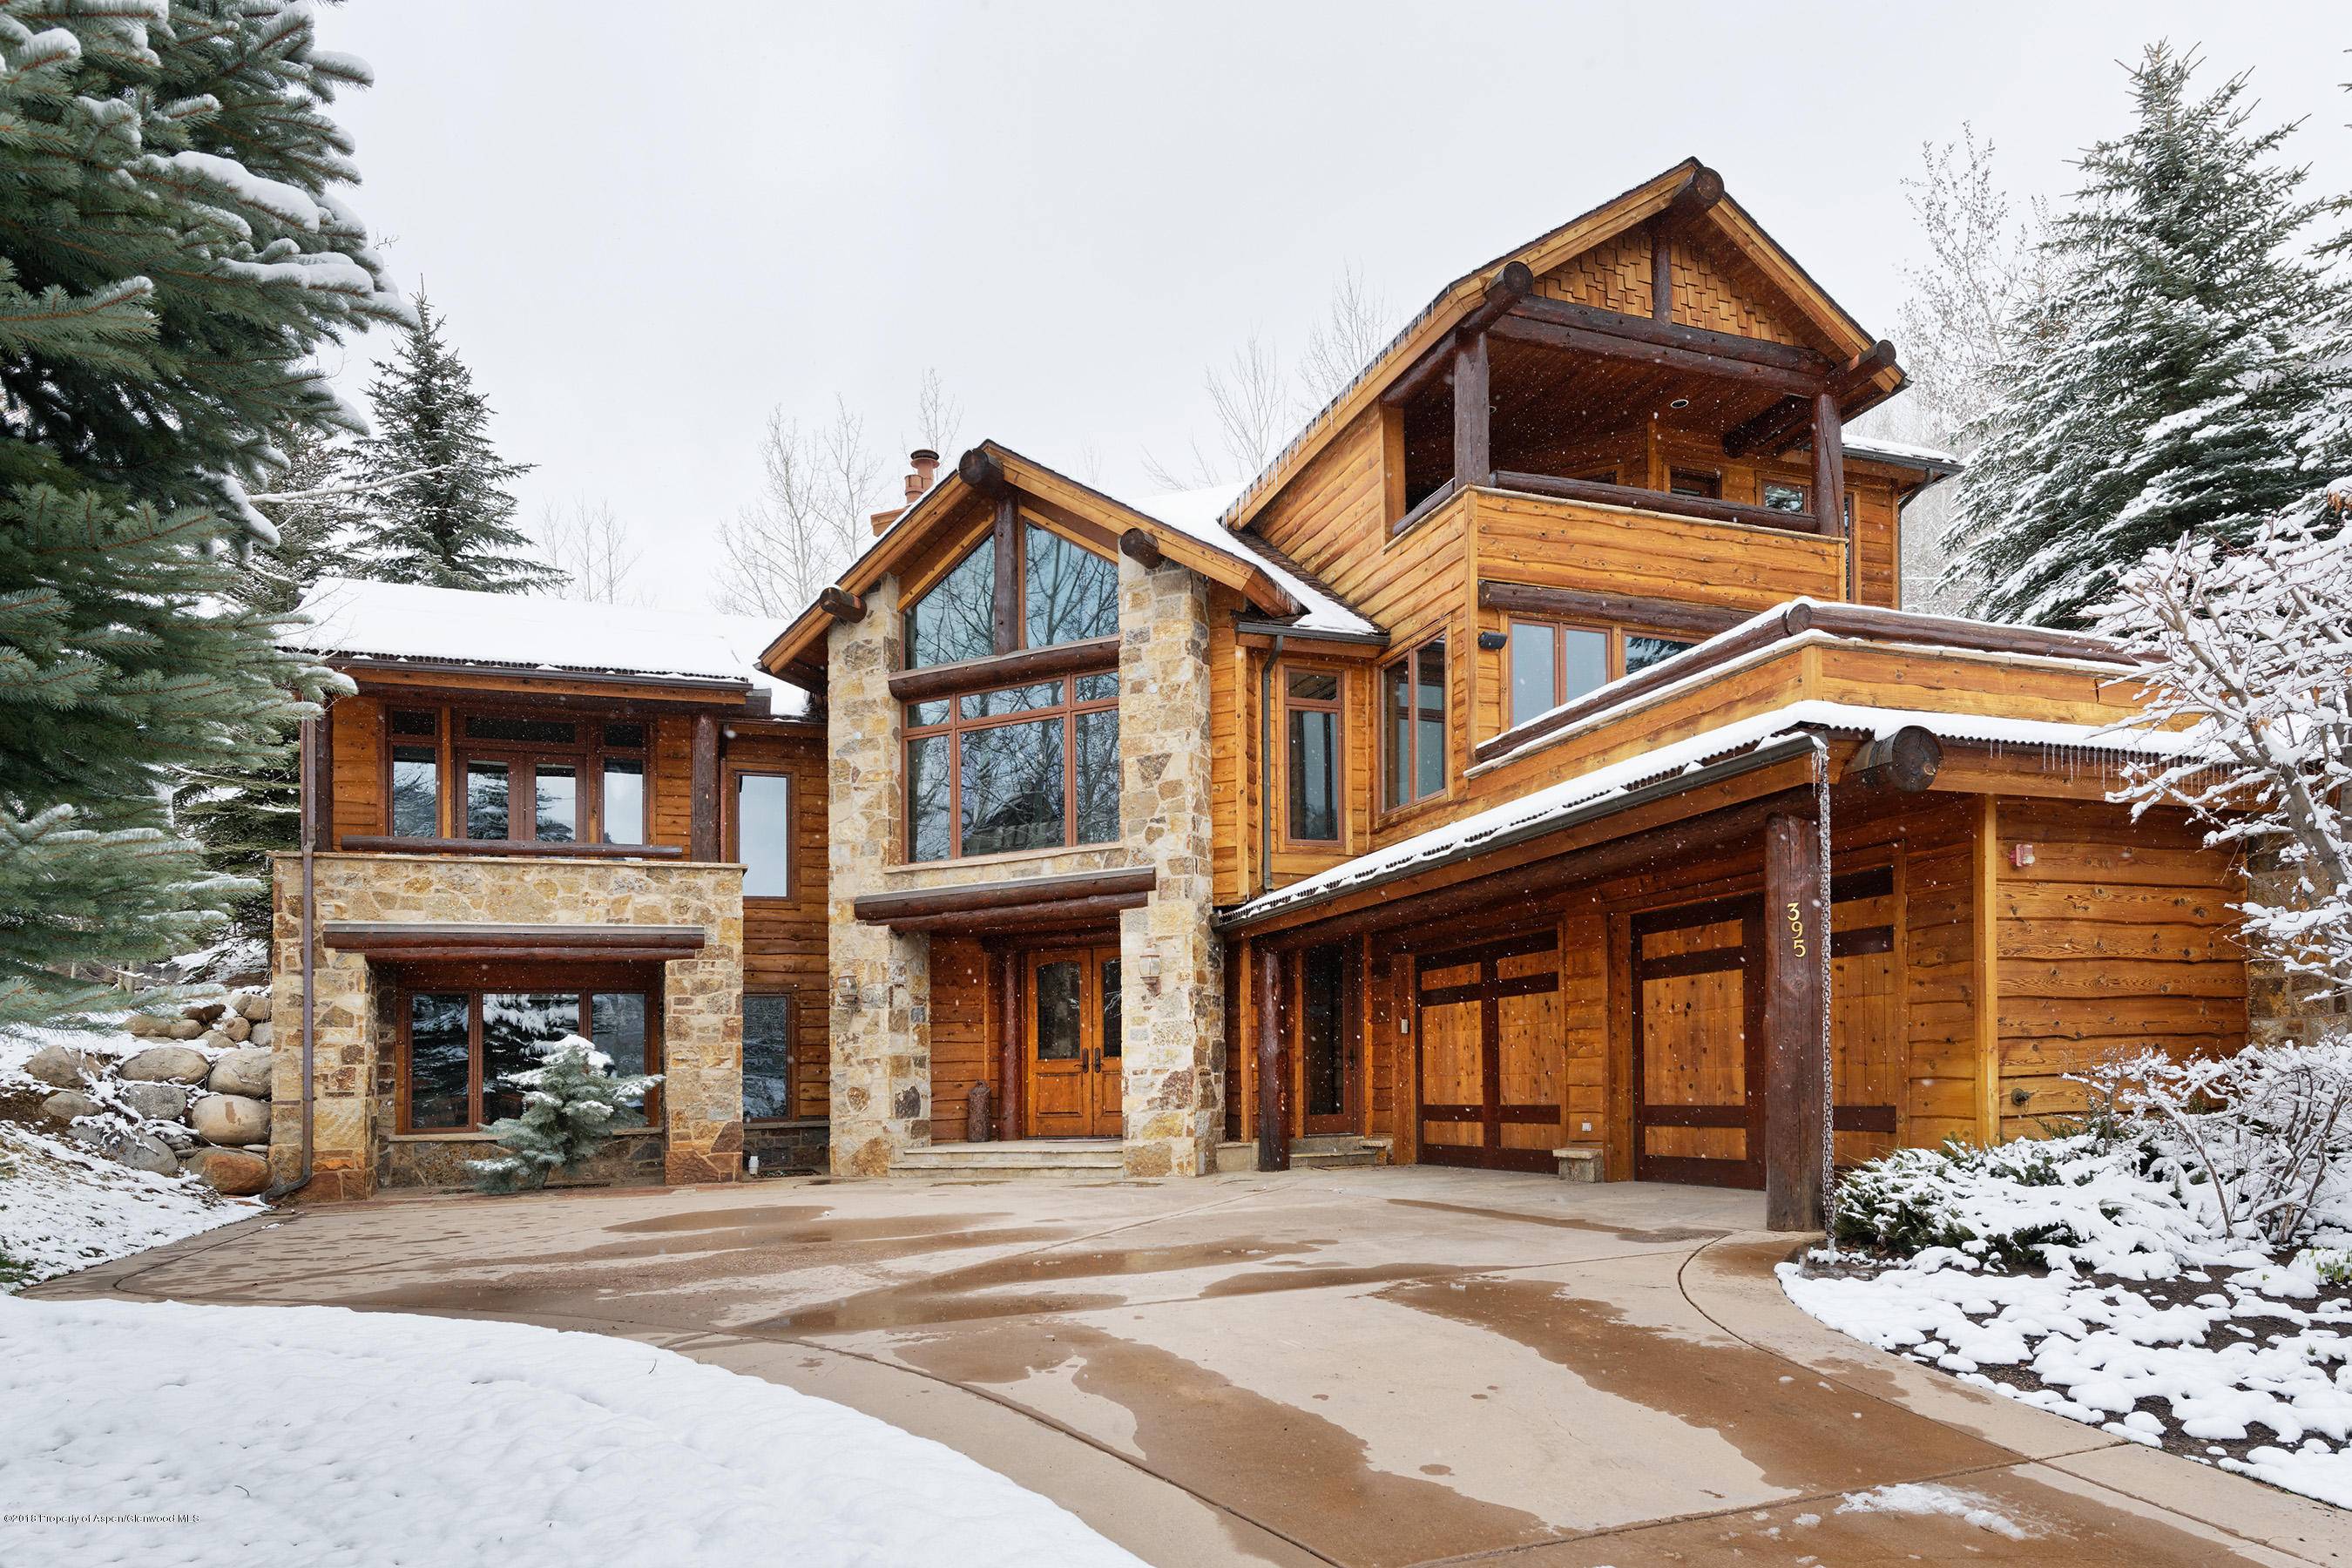 Unobstructed Aspen Mountain views from this 4 bedroom luxury rental home at the base of Smuggler Mine.